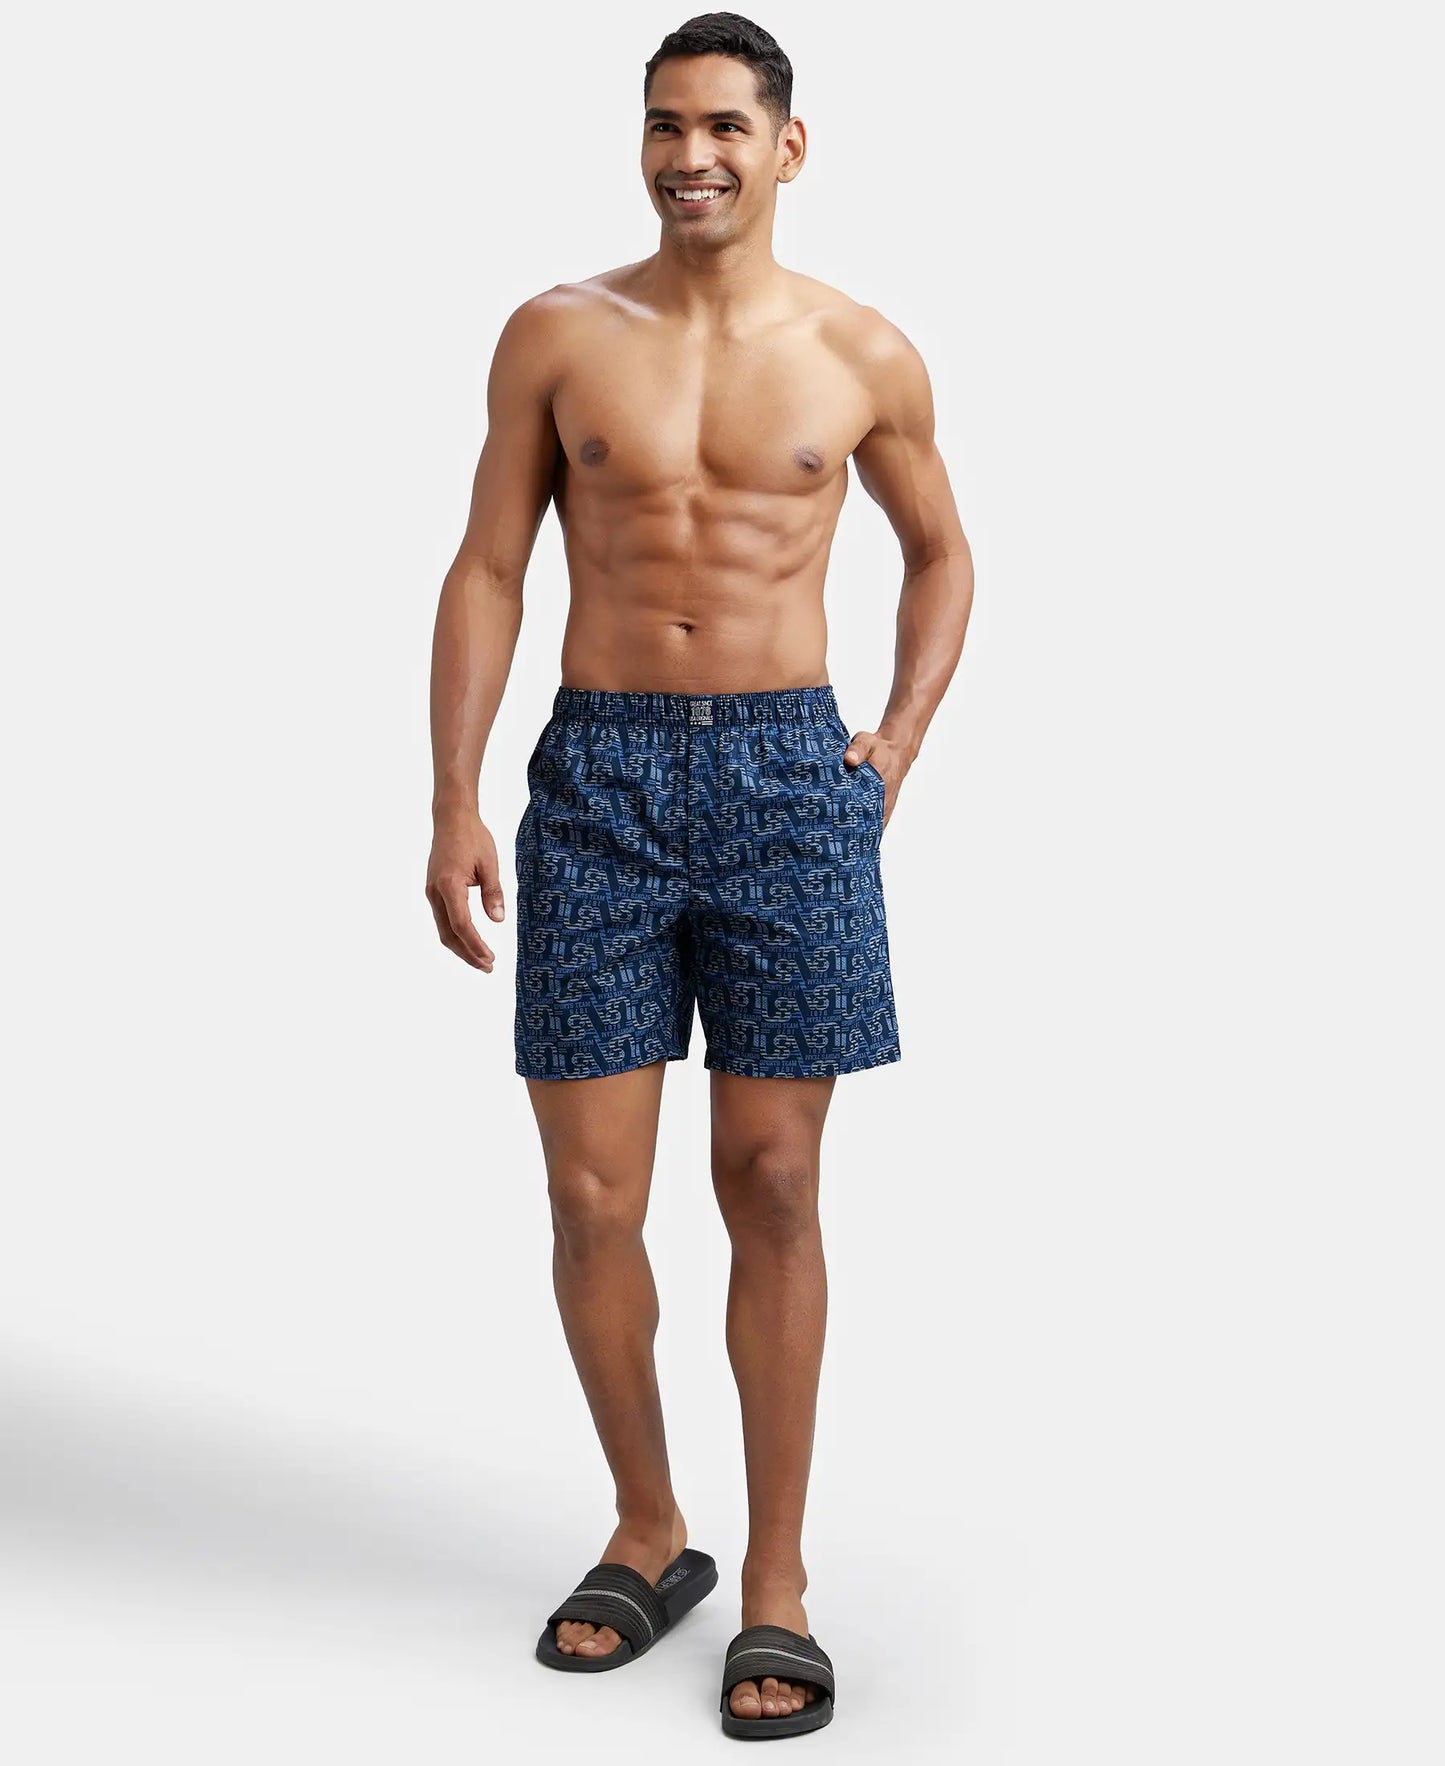 Super Combed Mercerized Cotton Woven Printed Boxer Shorts with Side Pocket - Navy Seaport Teal-13